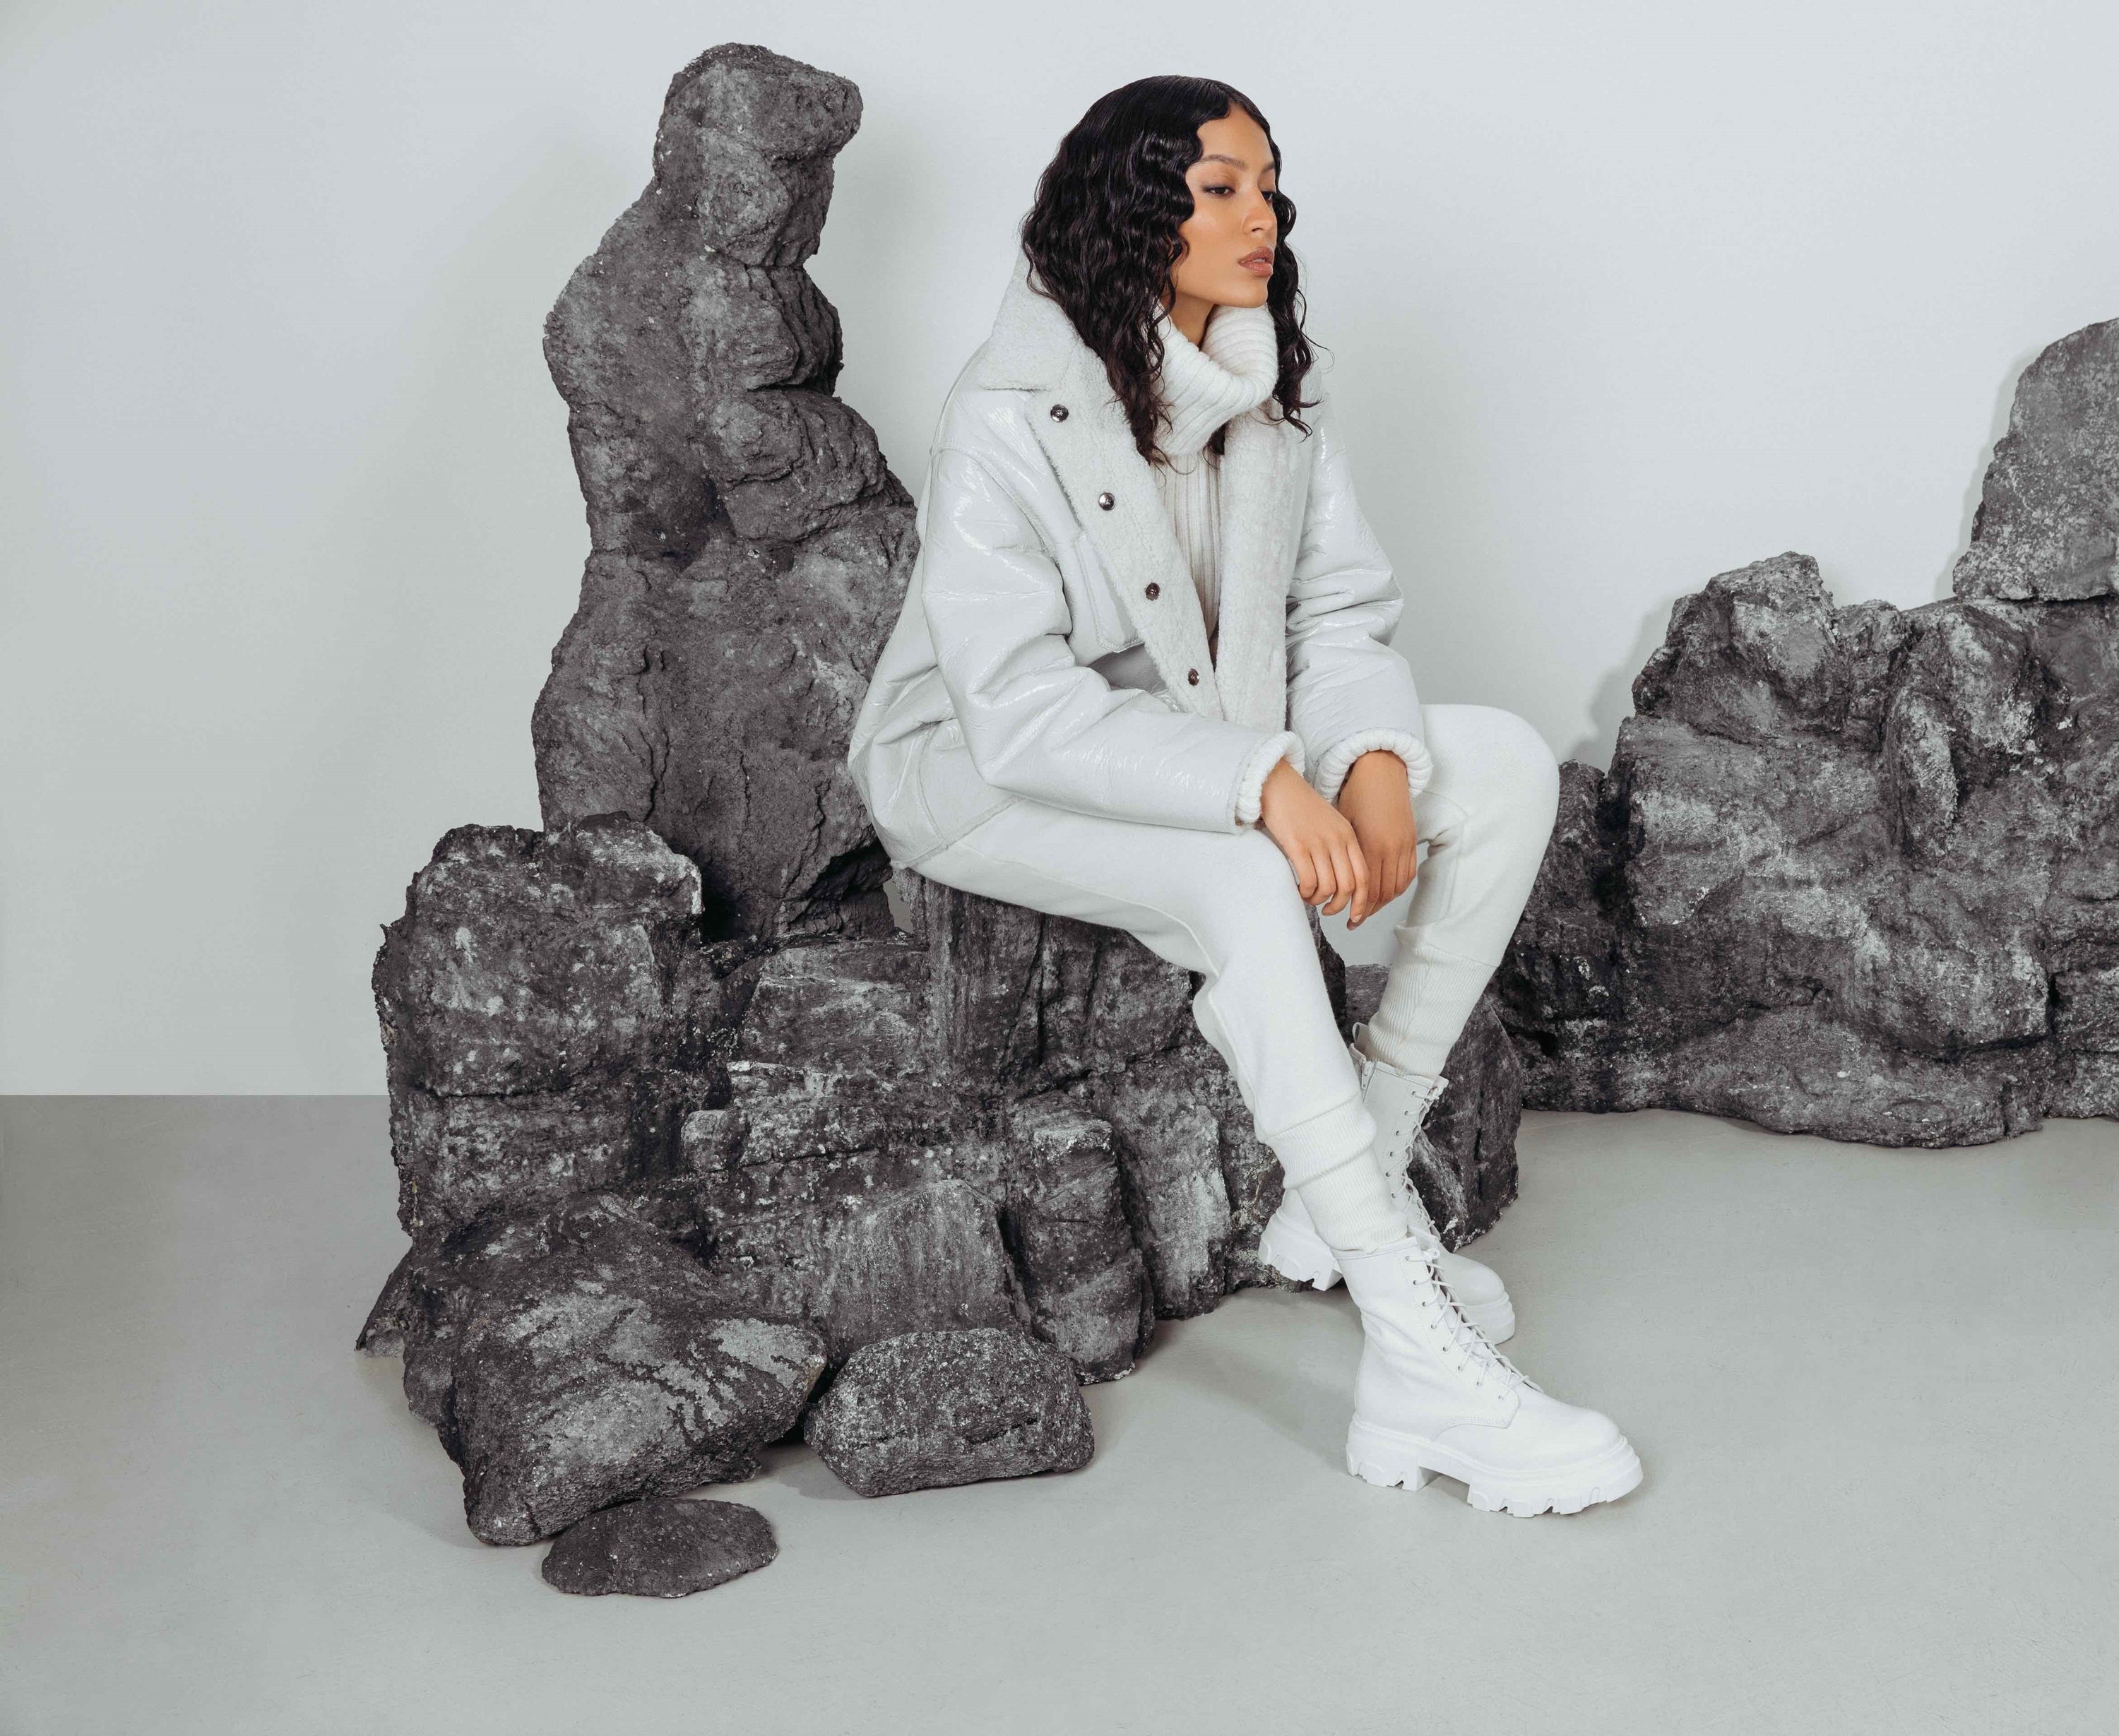 Moxy: WHITE GLOSSY CURLY. Shearling. Reversible. Dropped shoulder and loose sleeves. Designed for a loose fit through frame with a boxy cut. Styled after the French bleu de travail or Chore jacket. 26 in